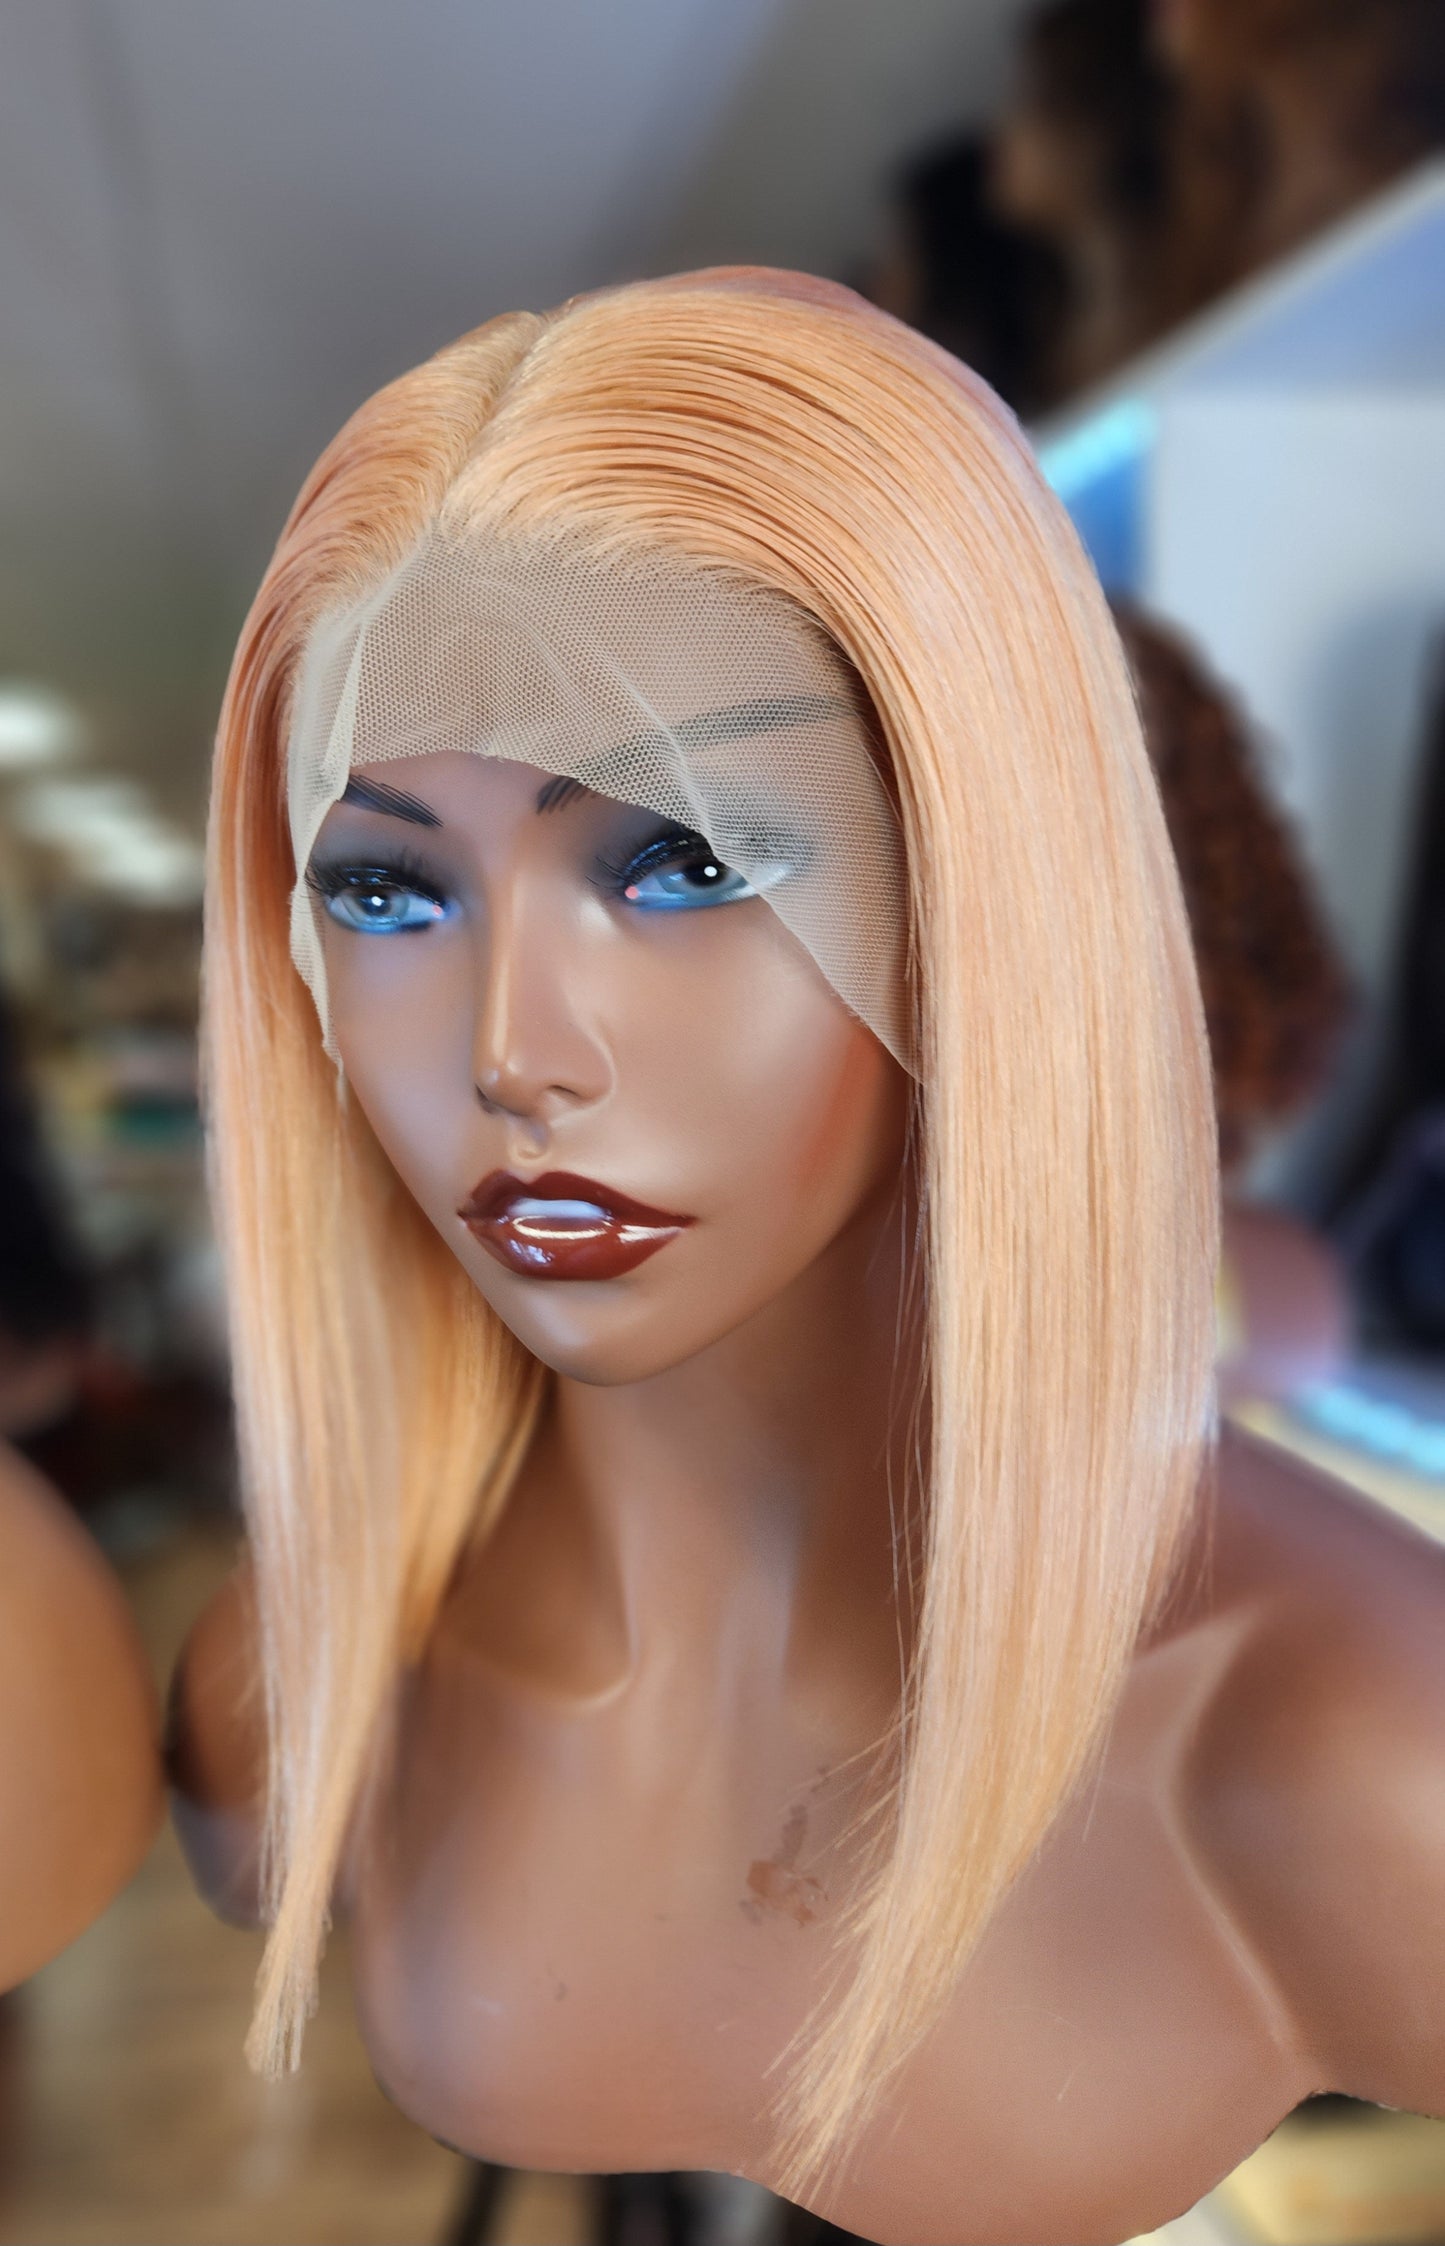 Rose Gold Wig Lace Front Wig Human Hair Colored Wig Straight 13x4 Lace Front  Wigs Pre Plucked With Baby Hair Short Bob  10 Inch Hair